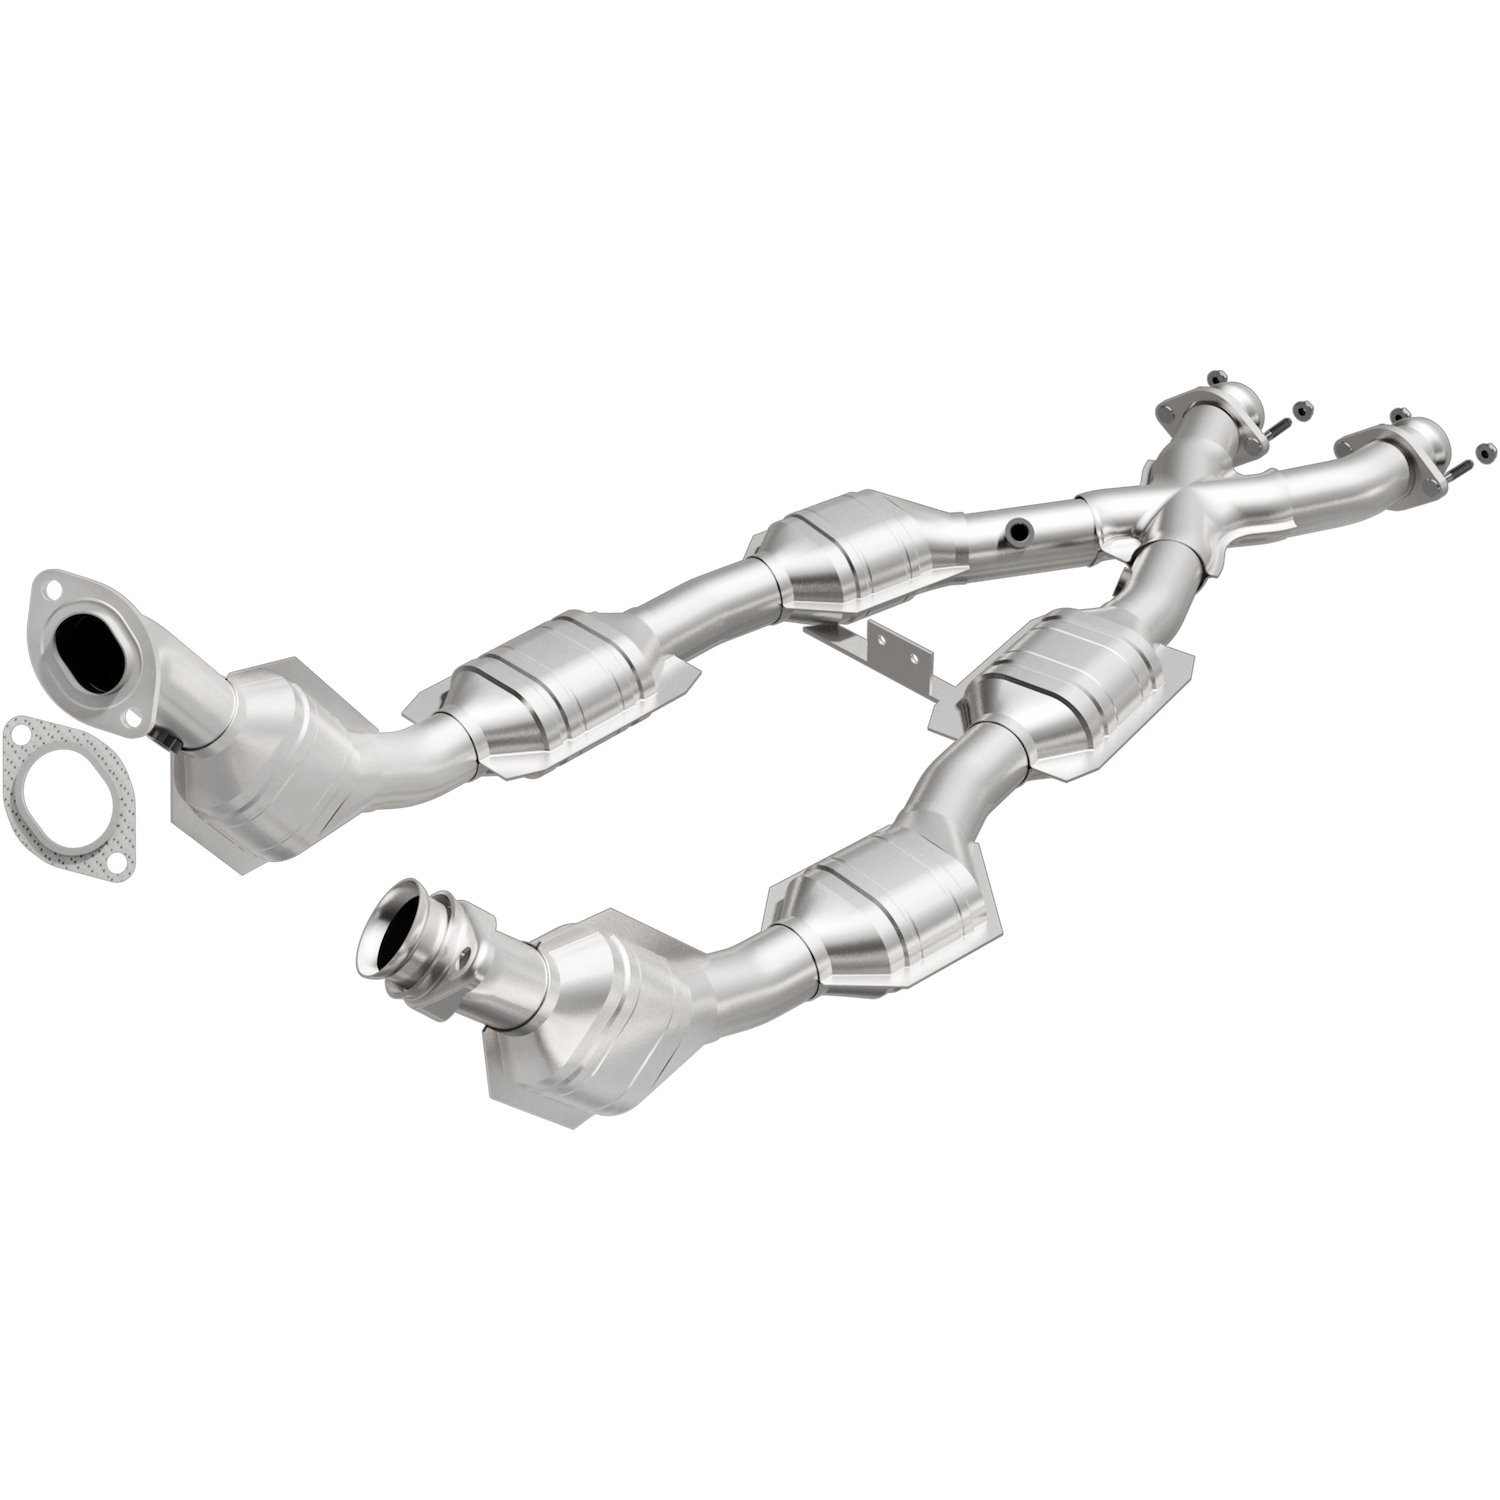 1996-1998 Ford Mustang California Grade CARB Compliant Direct-Fit Catalytic Converter